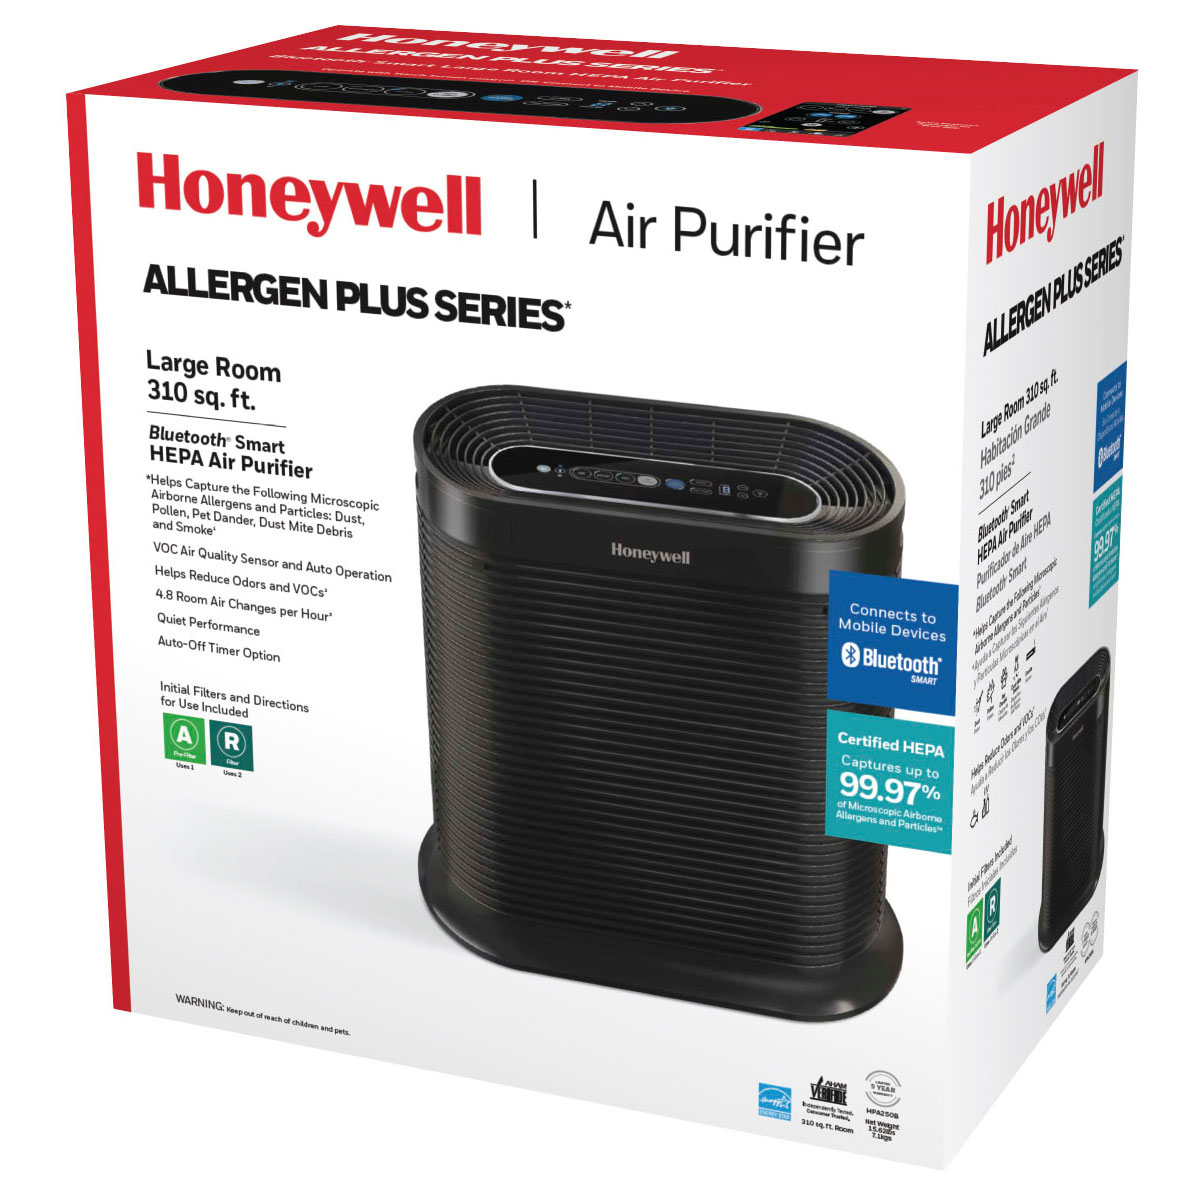 HPA250B HPA-250B HRF-APP1 Honeywell Blue Tooth Air Purifier White Black with Bluetooth with Household Odor & Gas Reducing Universal Pre-Filter Black and AllergnRemv Filter 